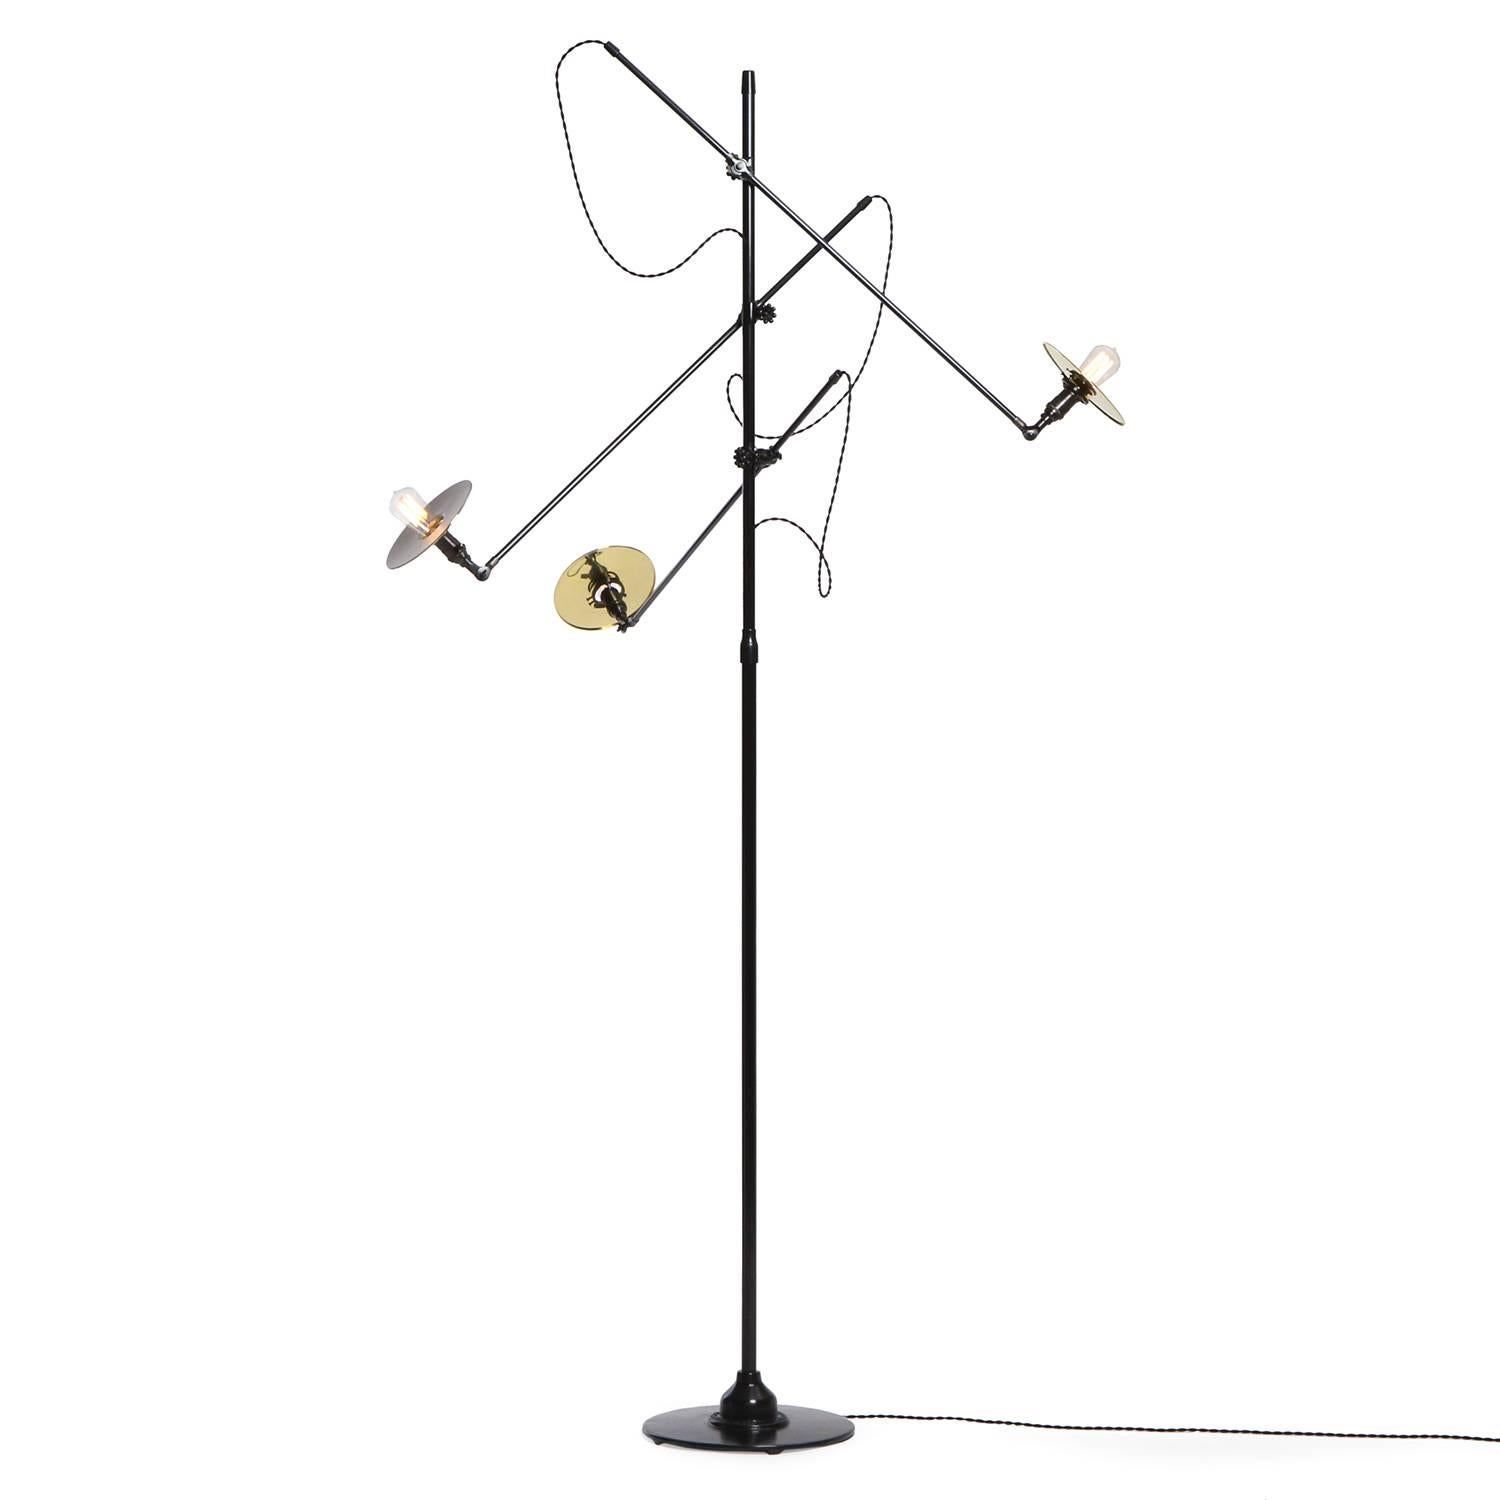 A 3-arm Industrial style floor lamp manufactured by O.C. White featuring impressively scaled and finely fabricated parts in patinated steel and polished brass. Lamp features three articulating arms that also can be adjusted vertically, rising from a